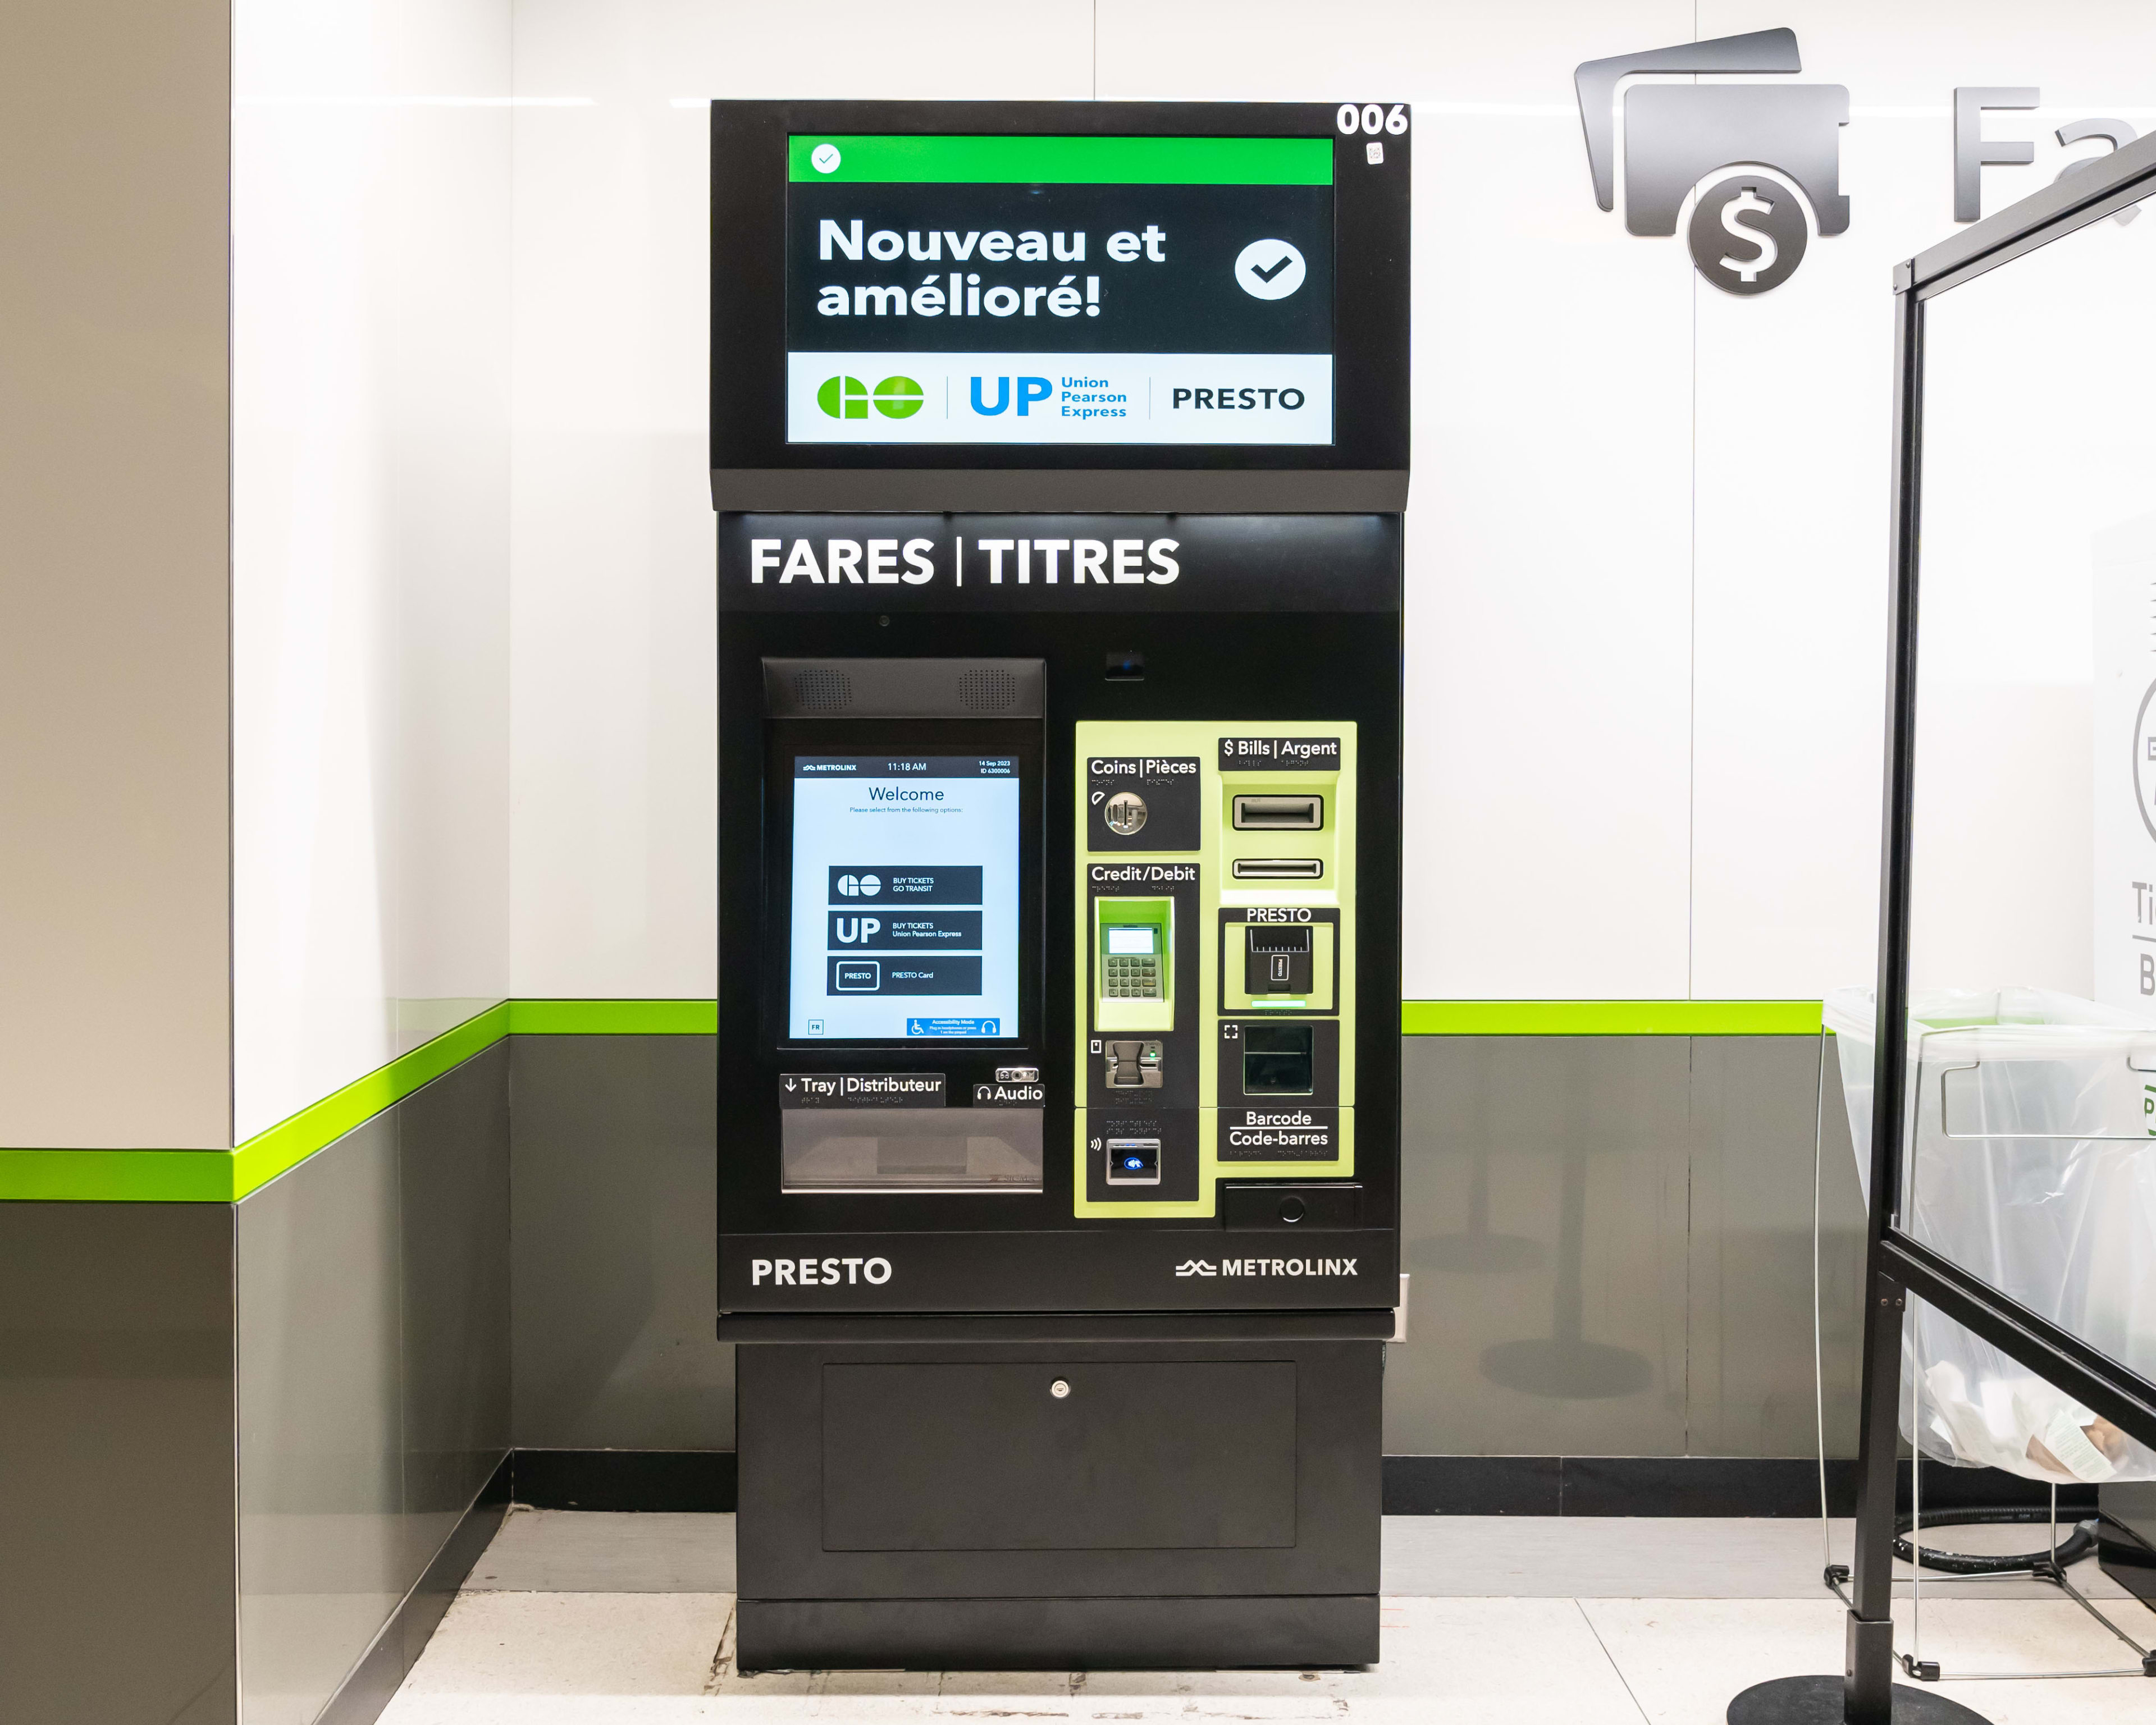 Photo of a new ticket vending machine